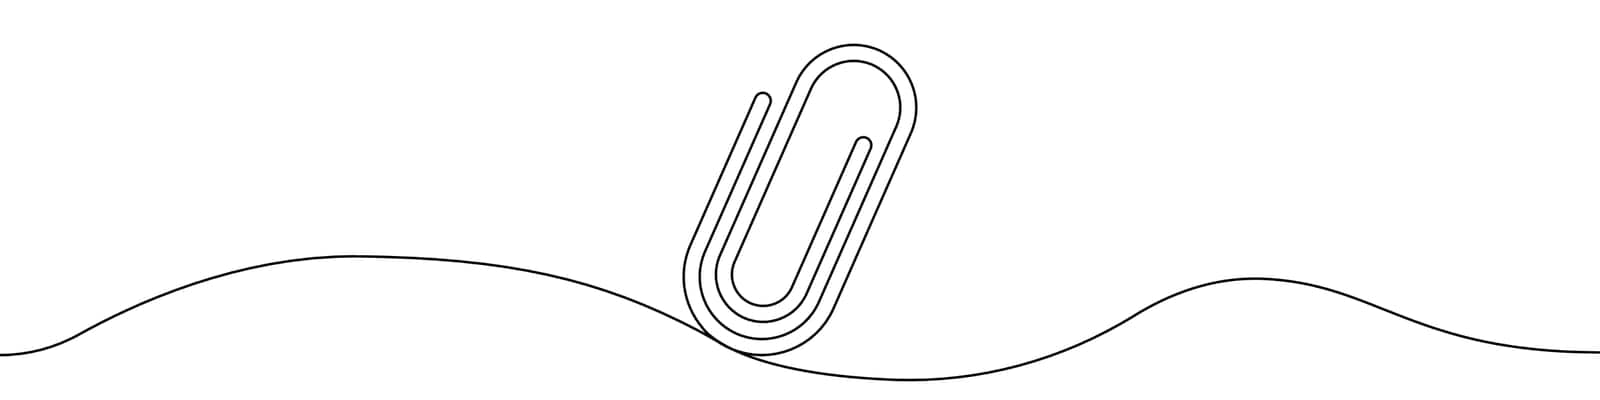 Clip icon line continuous drawing vector. One line Clip icon vector background. Clip mark icon. Continuous outline of a Clip icon. by Moreidea